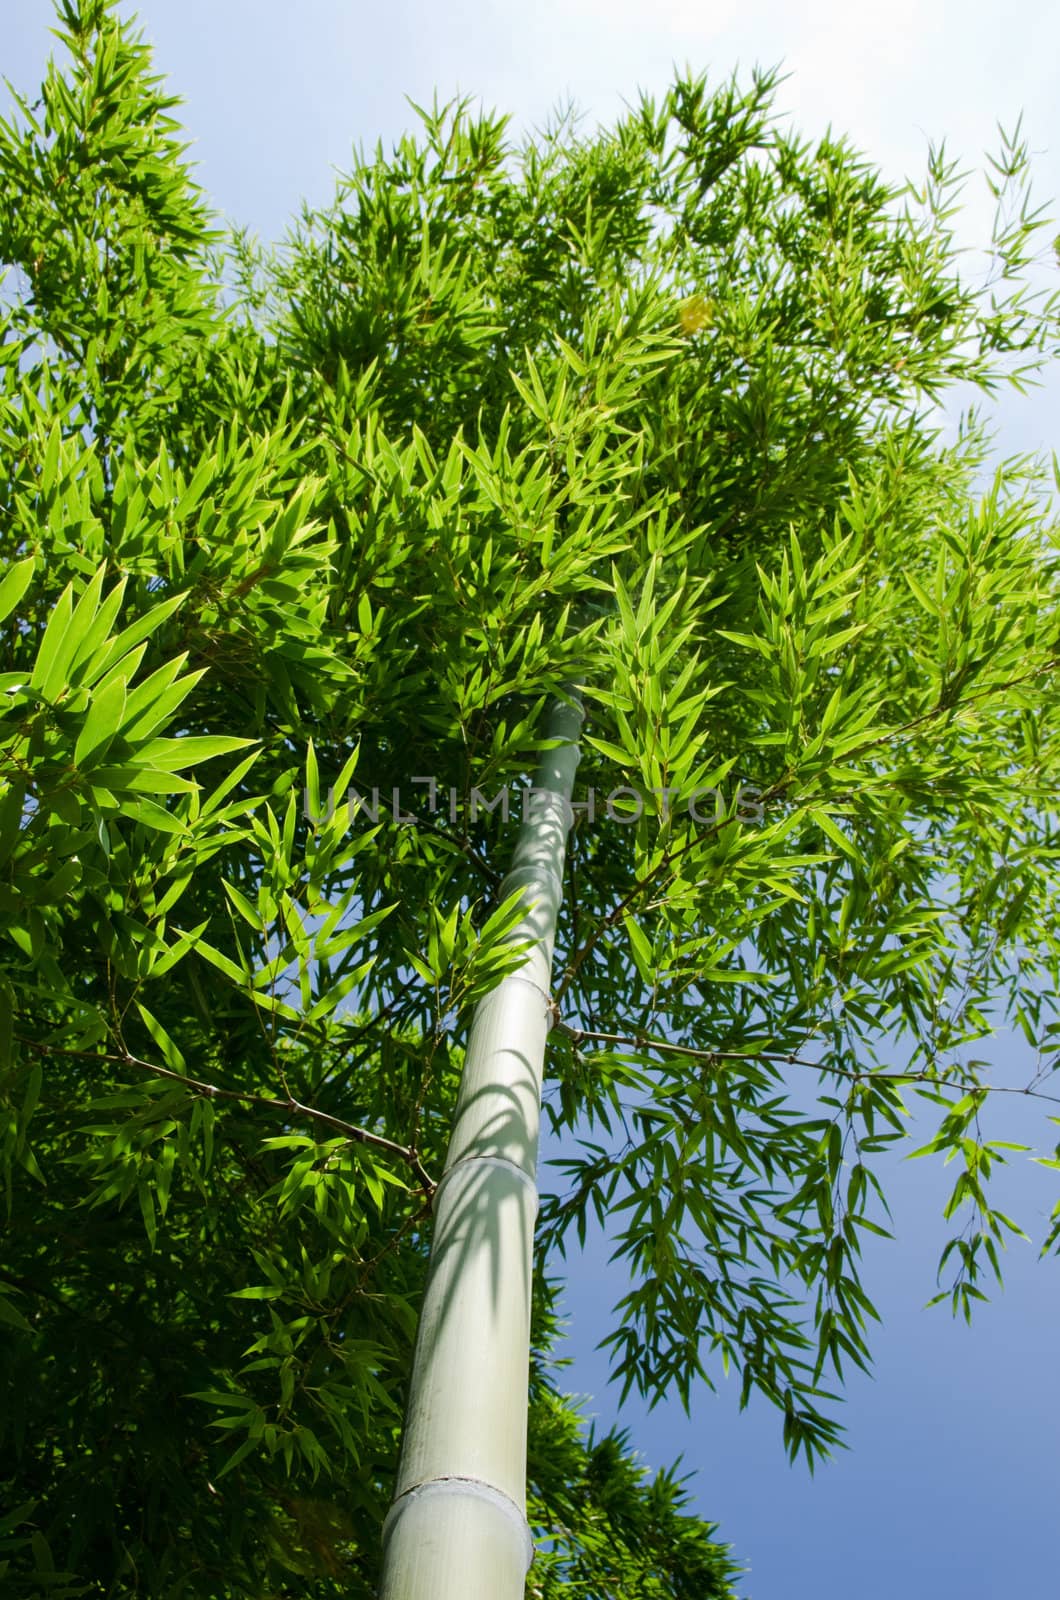 Green bamboo tree as seen against the blue sky